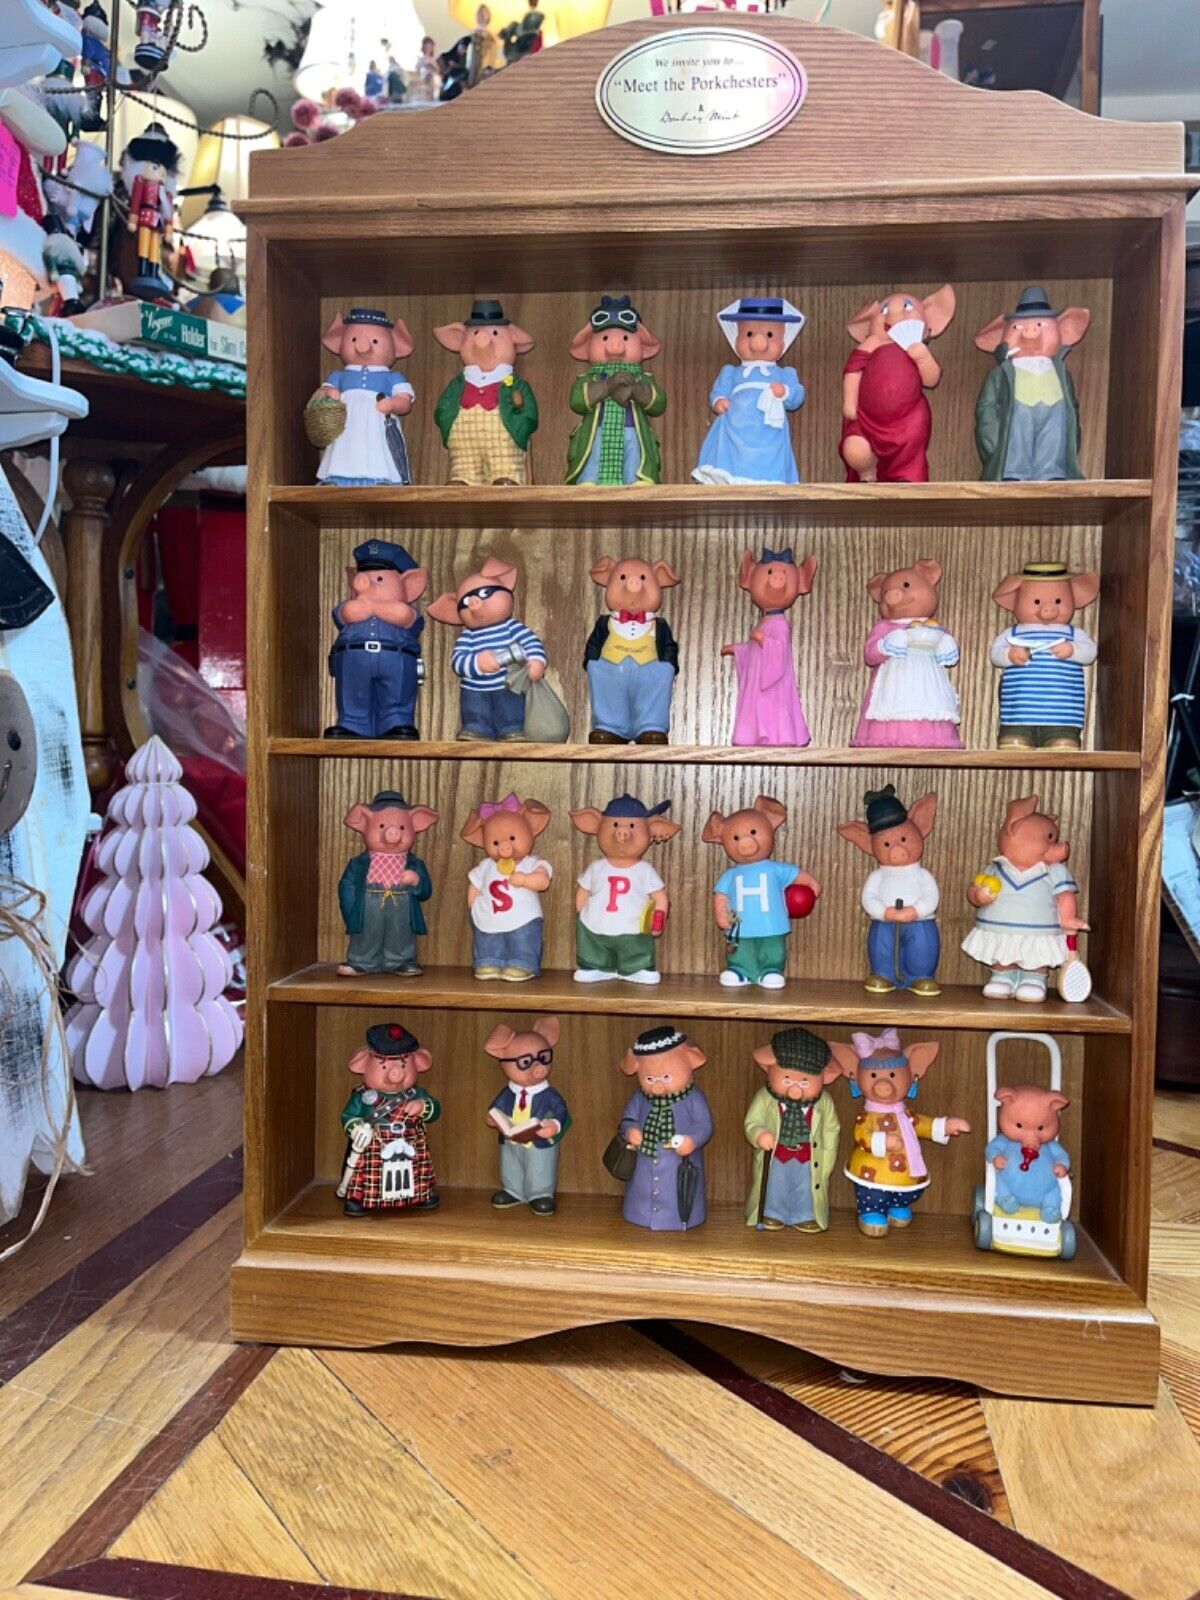 24 Meet The Porkchesters Figurines From Danbury Mint With Display Case